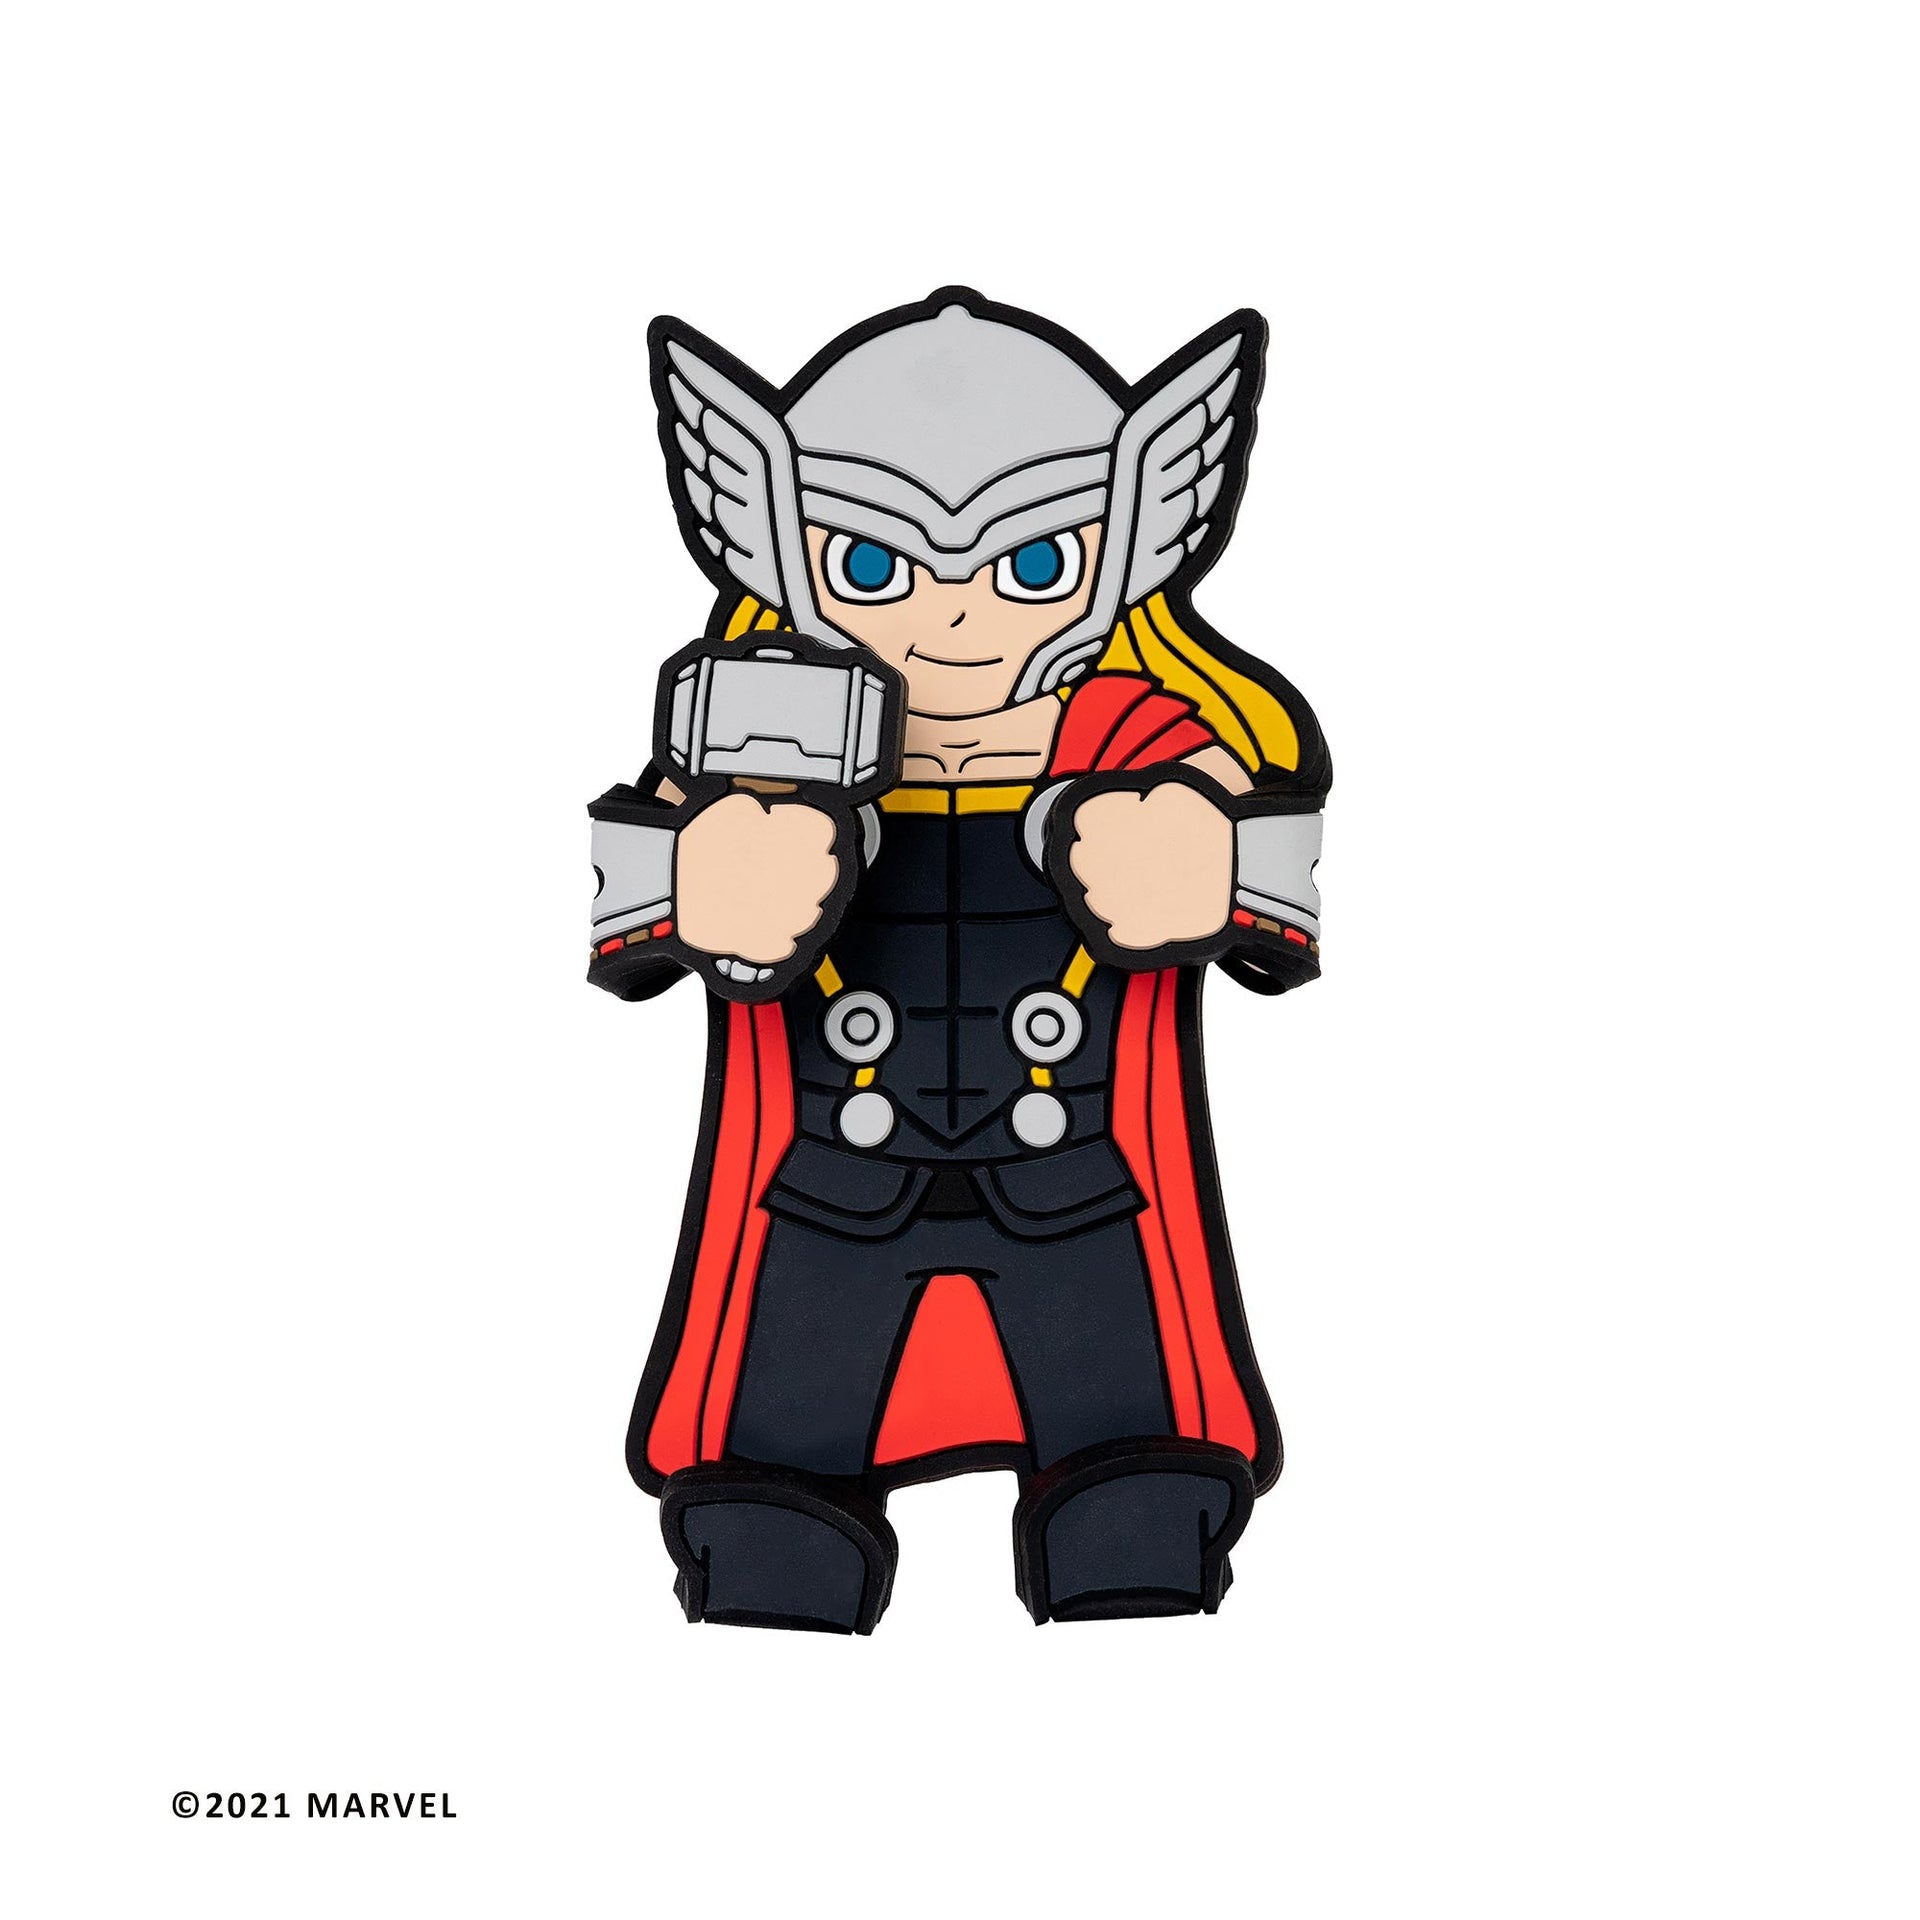 Image of Marvel Comics Thor Hug Buddy on a white background with arms and legs folded inward, ready to grasp your cell-phone